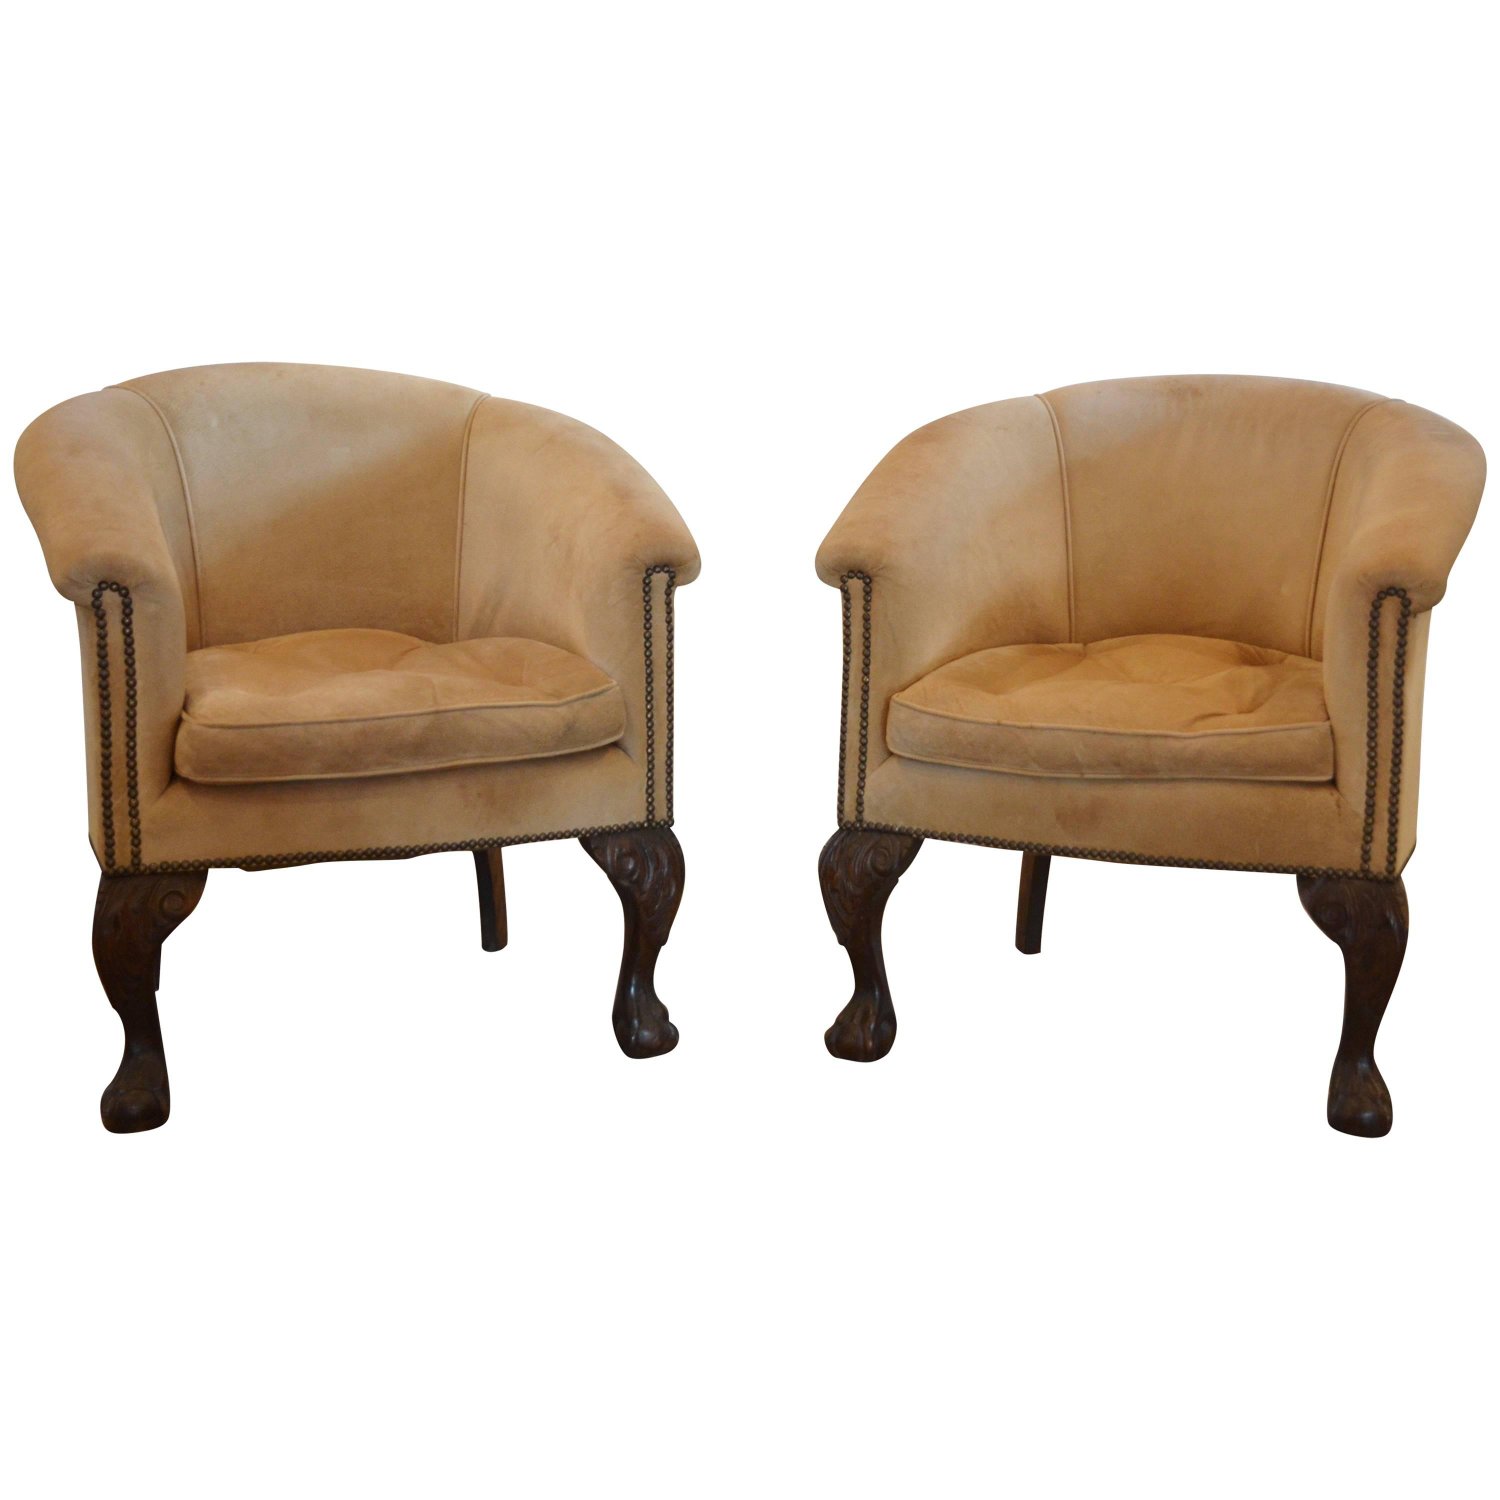 Suede Armchairs - 76 For Sale at 1stdibs